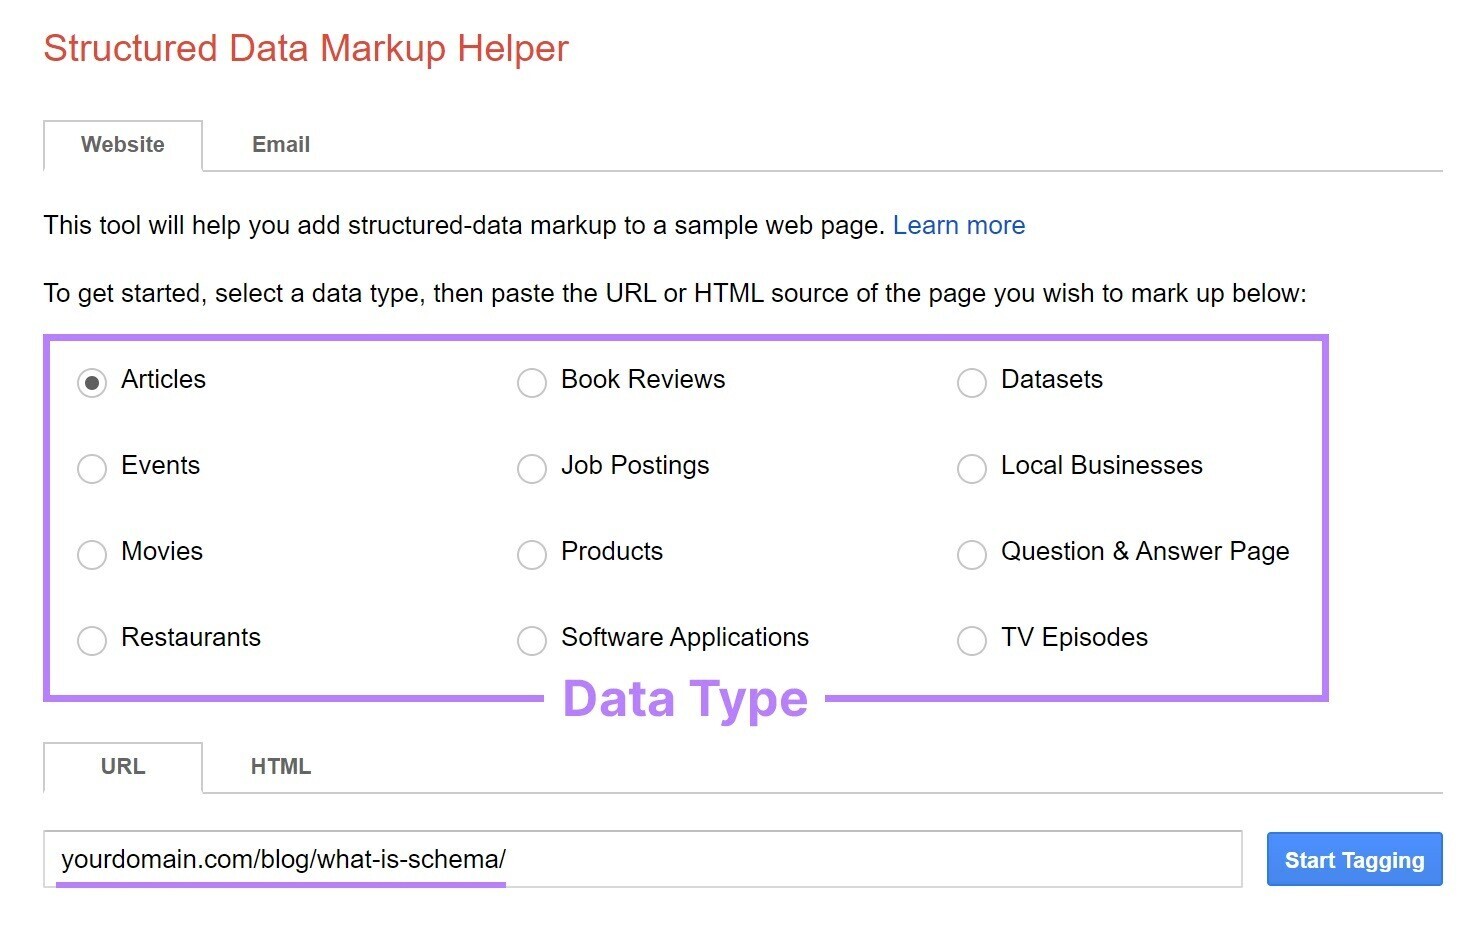 to start, choose the data type in Structured Data Markup Helper